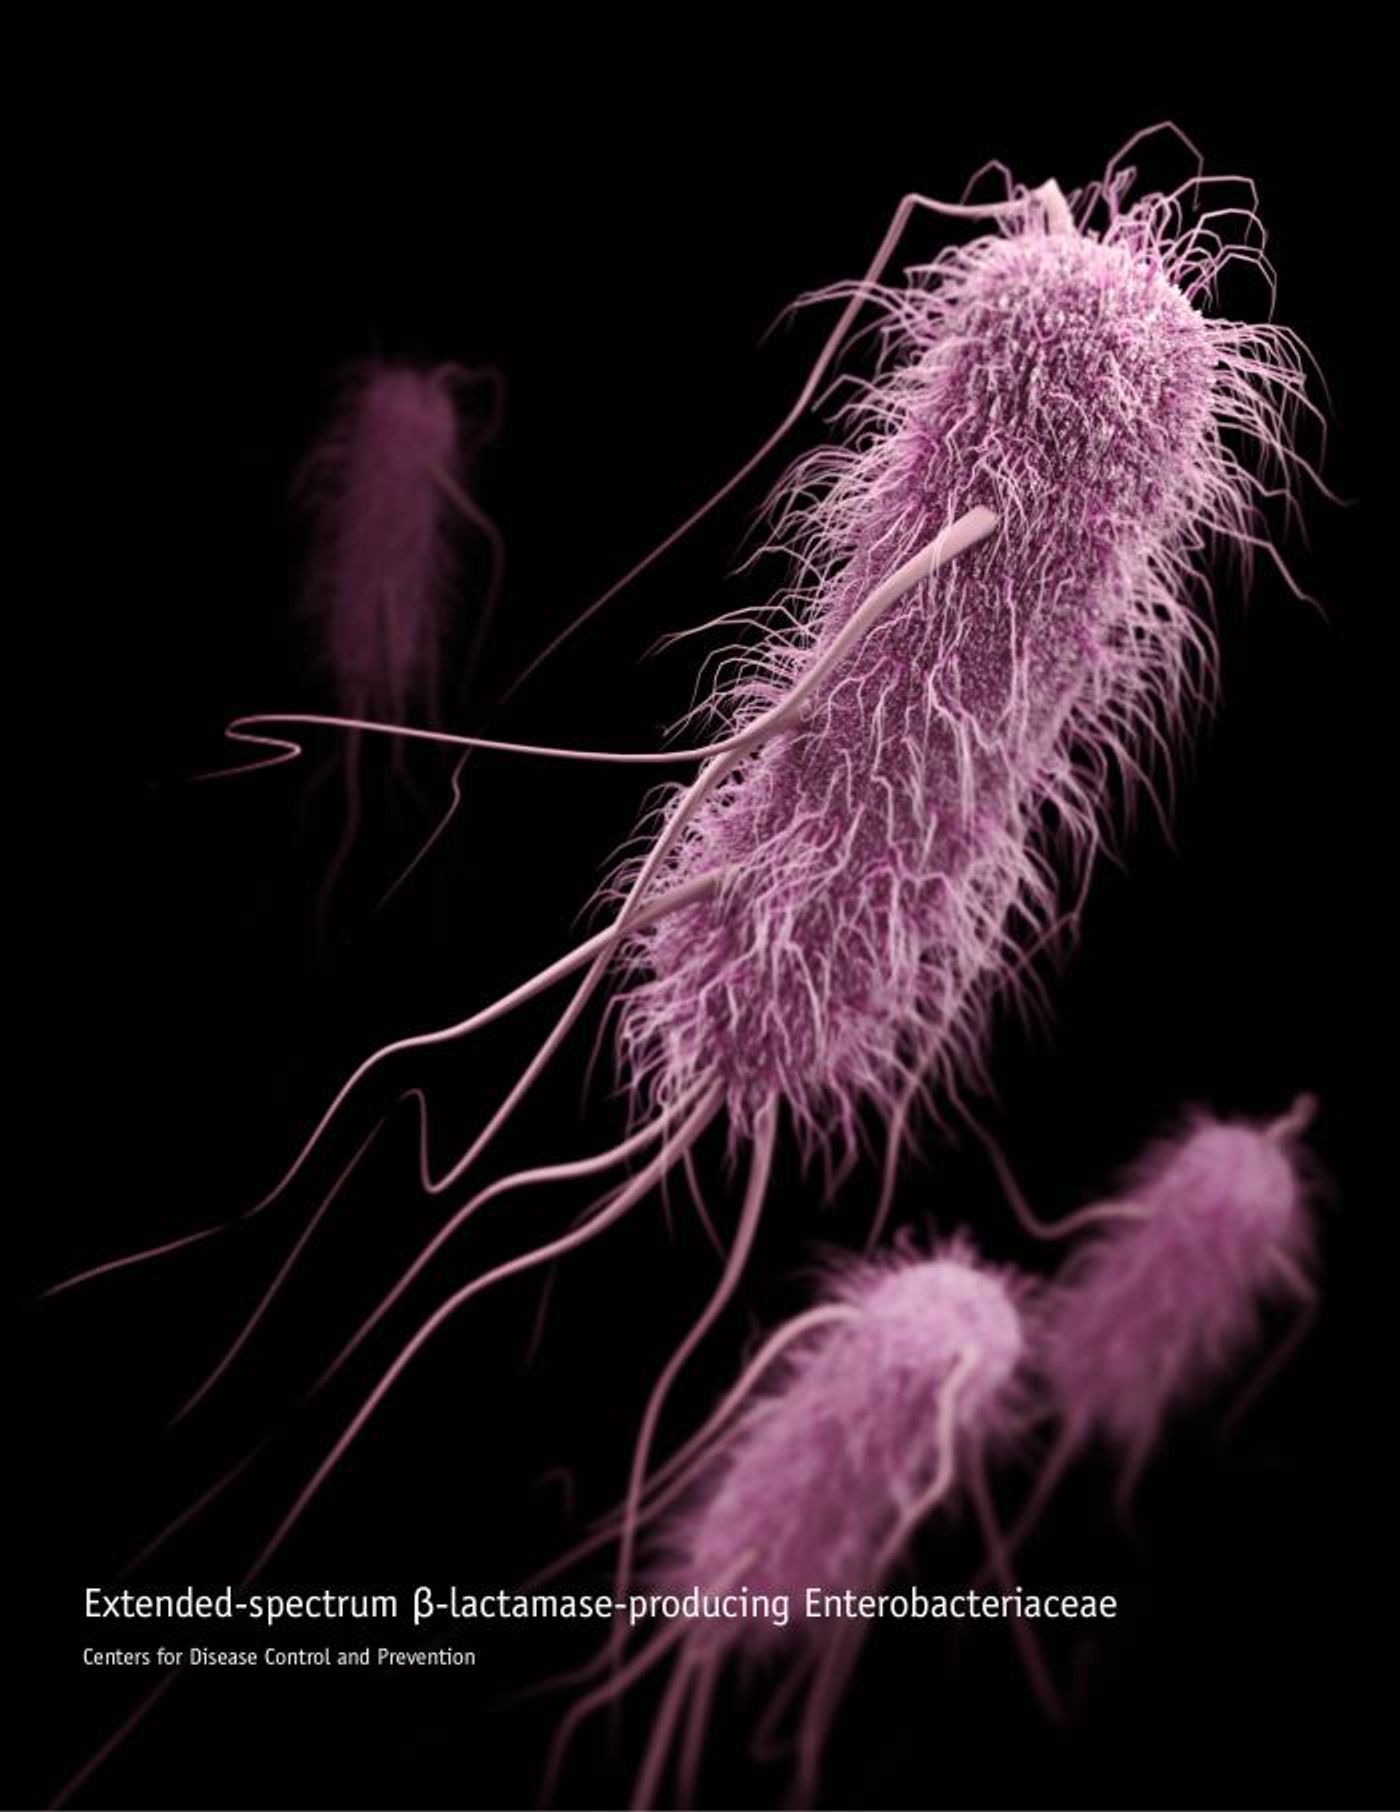 An artistic recreation was based on SEM imagery of a pathogenic form of Escherichia coli. / Credit: CDC/ Antibiotic Resistance Coordination and Strategy Unit / Alissa Eckert - Medical Illustrator